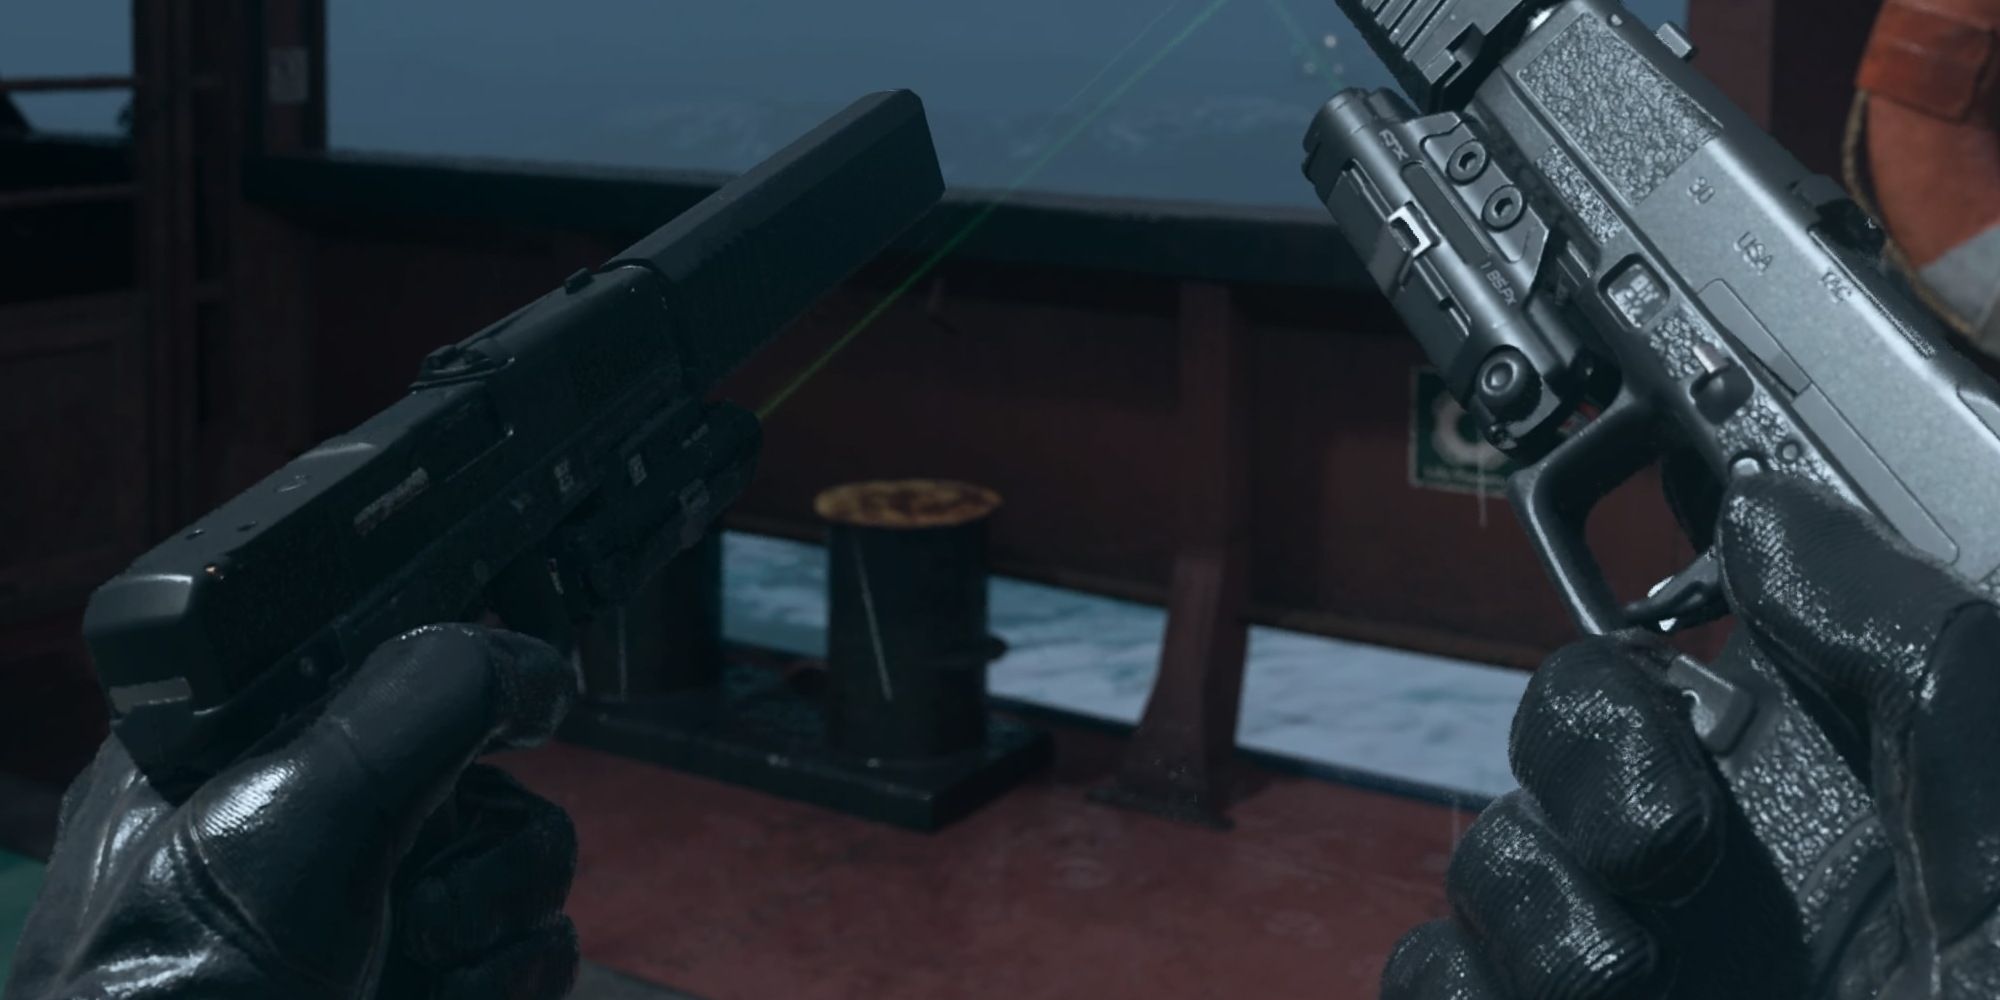 Players are holding two X12 pistols with Akimbo attachments from COD:MW2.